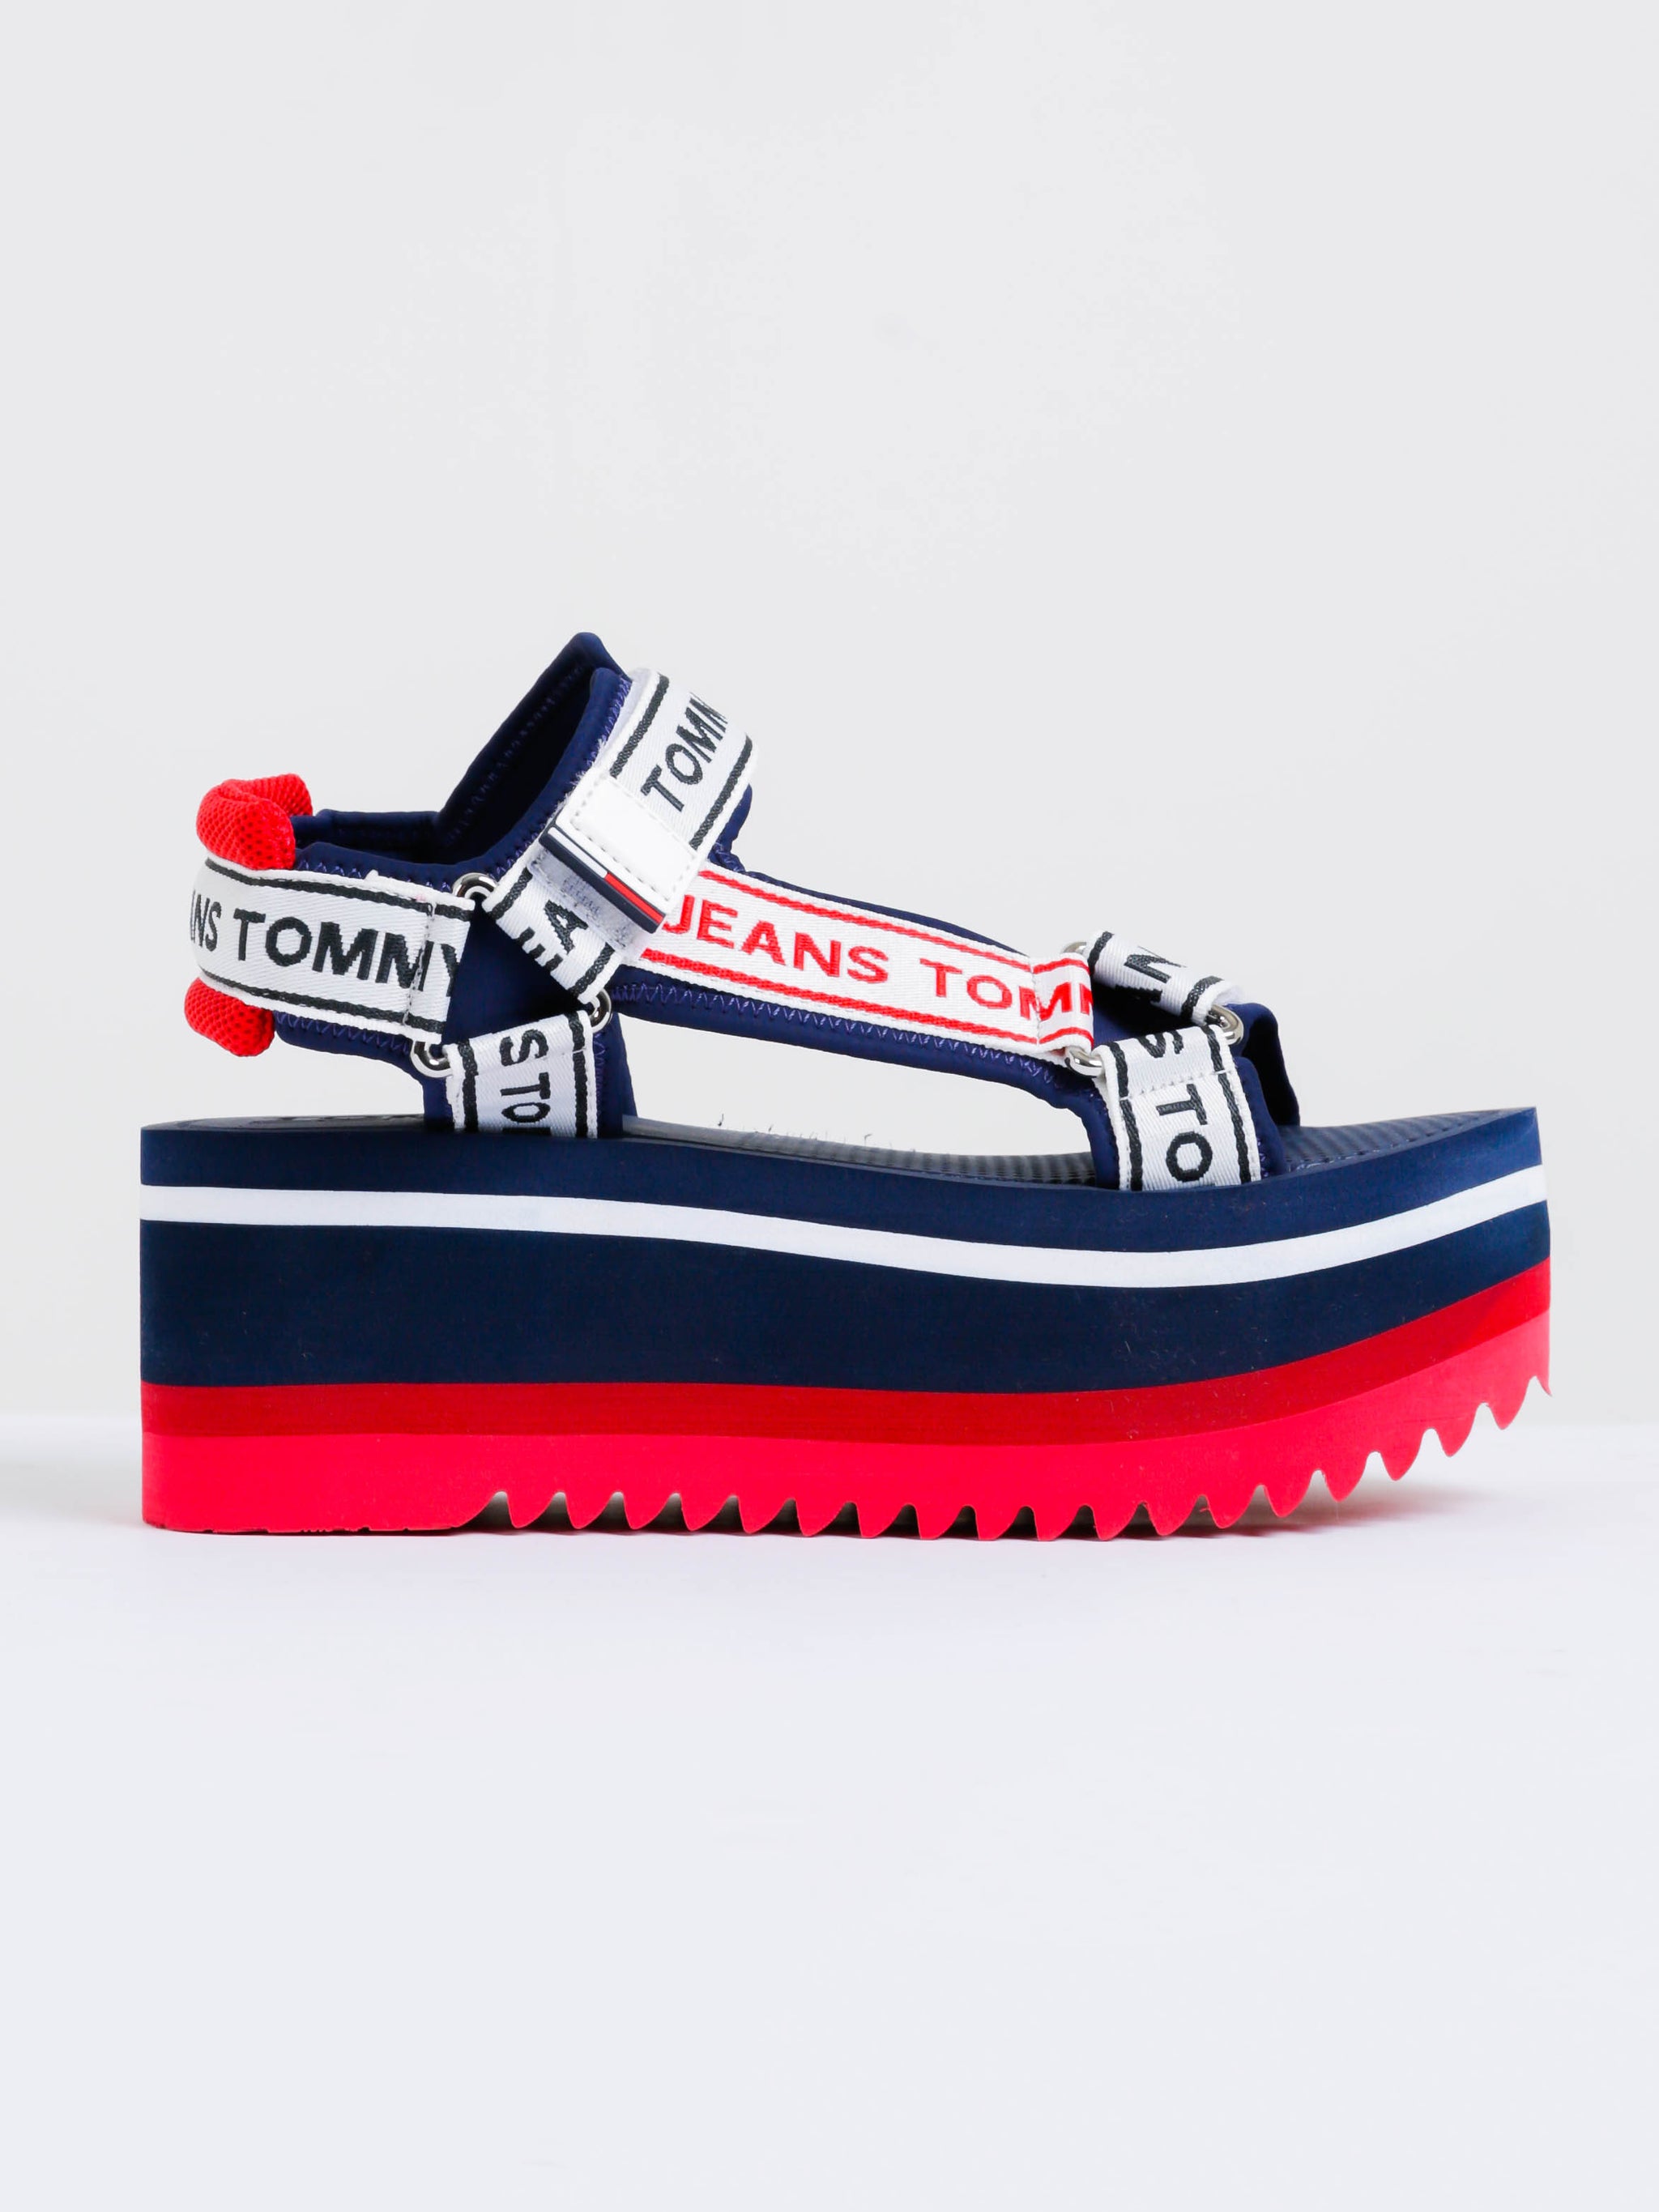 Womens Tommy Jeans Technical Platform Sandal Red & Navy - Glue Store